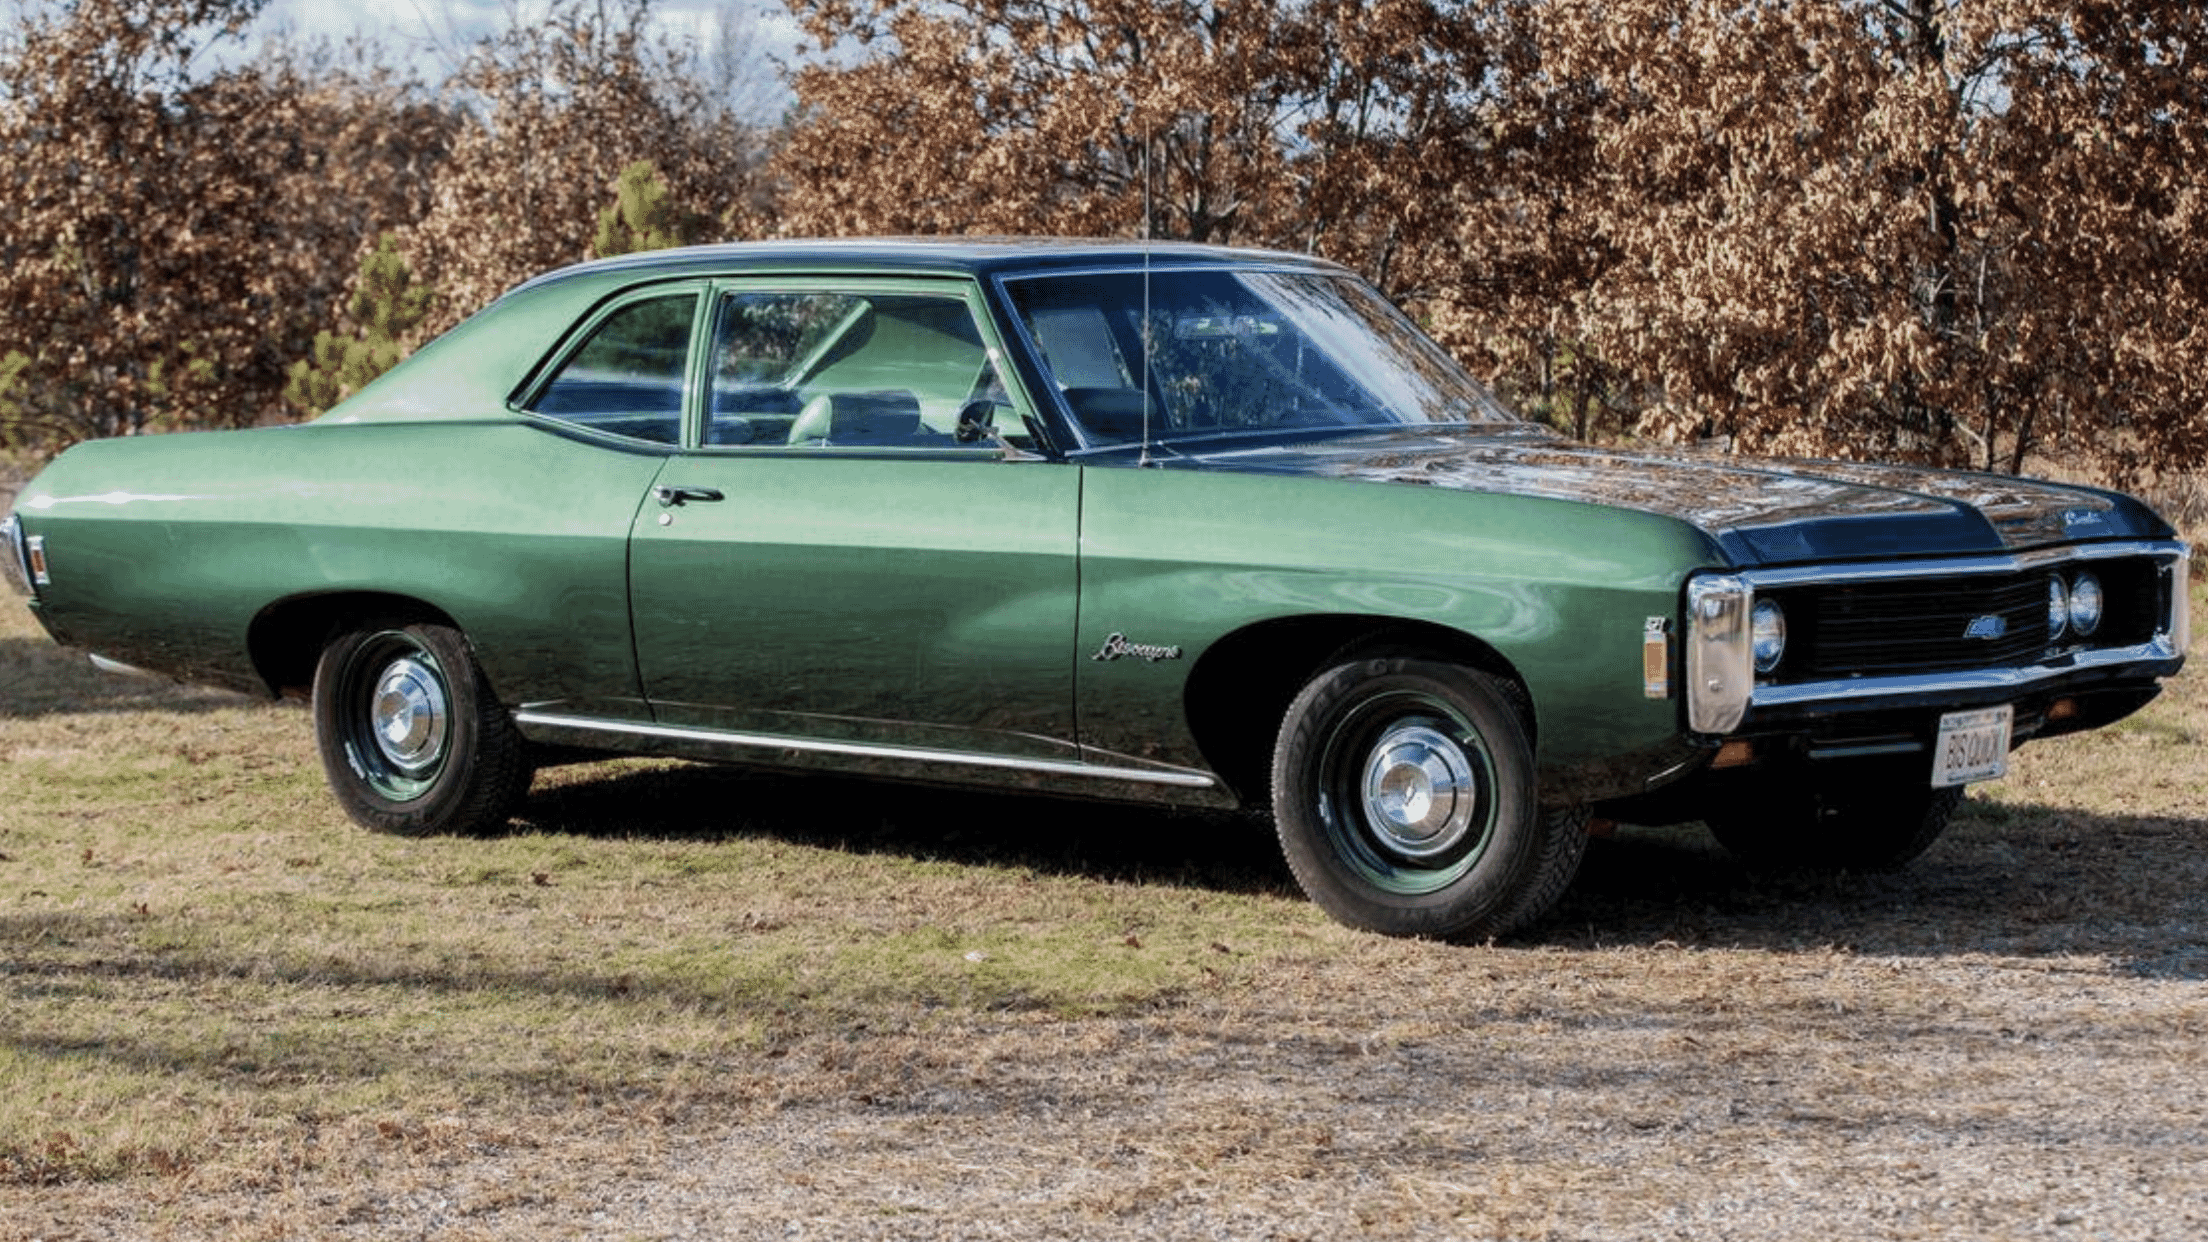 Side view of a green 1969 Chevrolet Biscayne two door hardtop